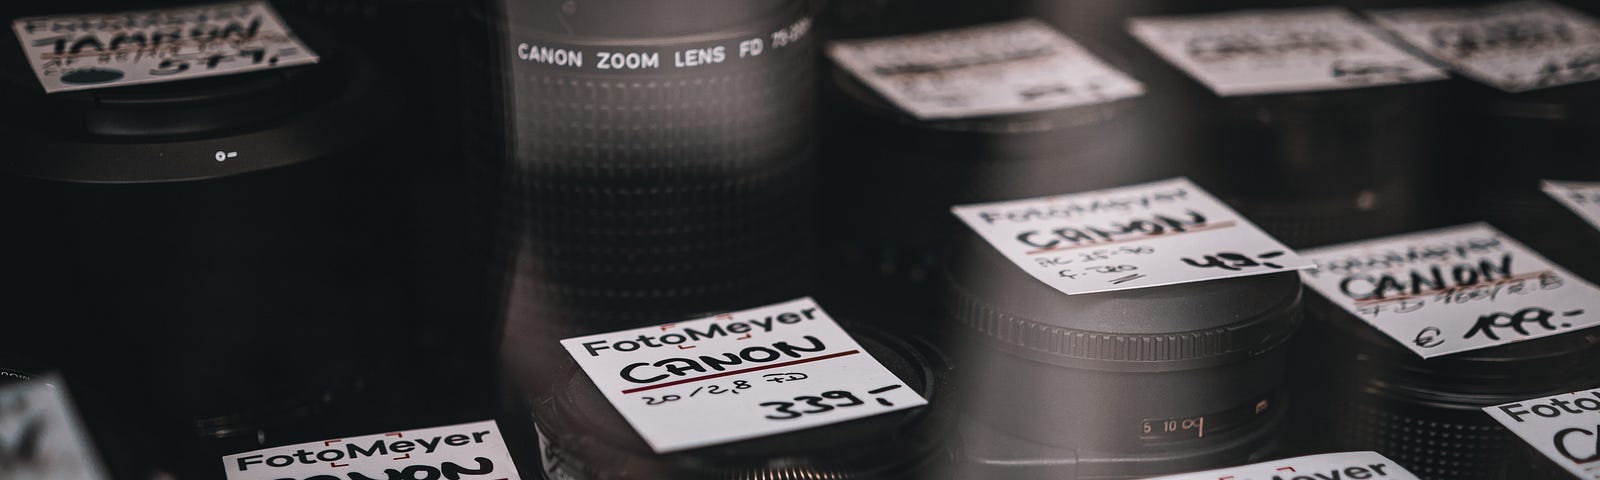 Camera lenses on display with prices